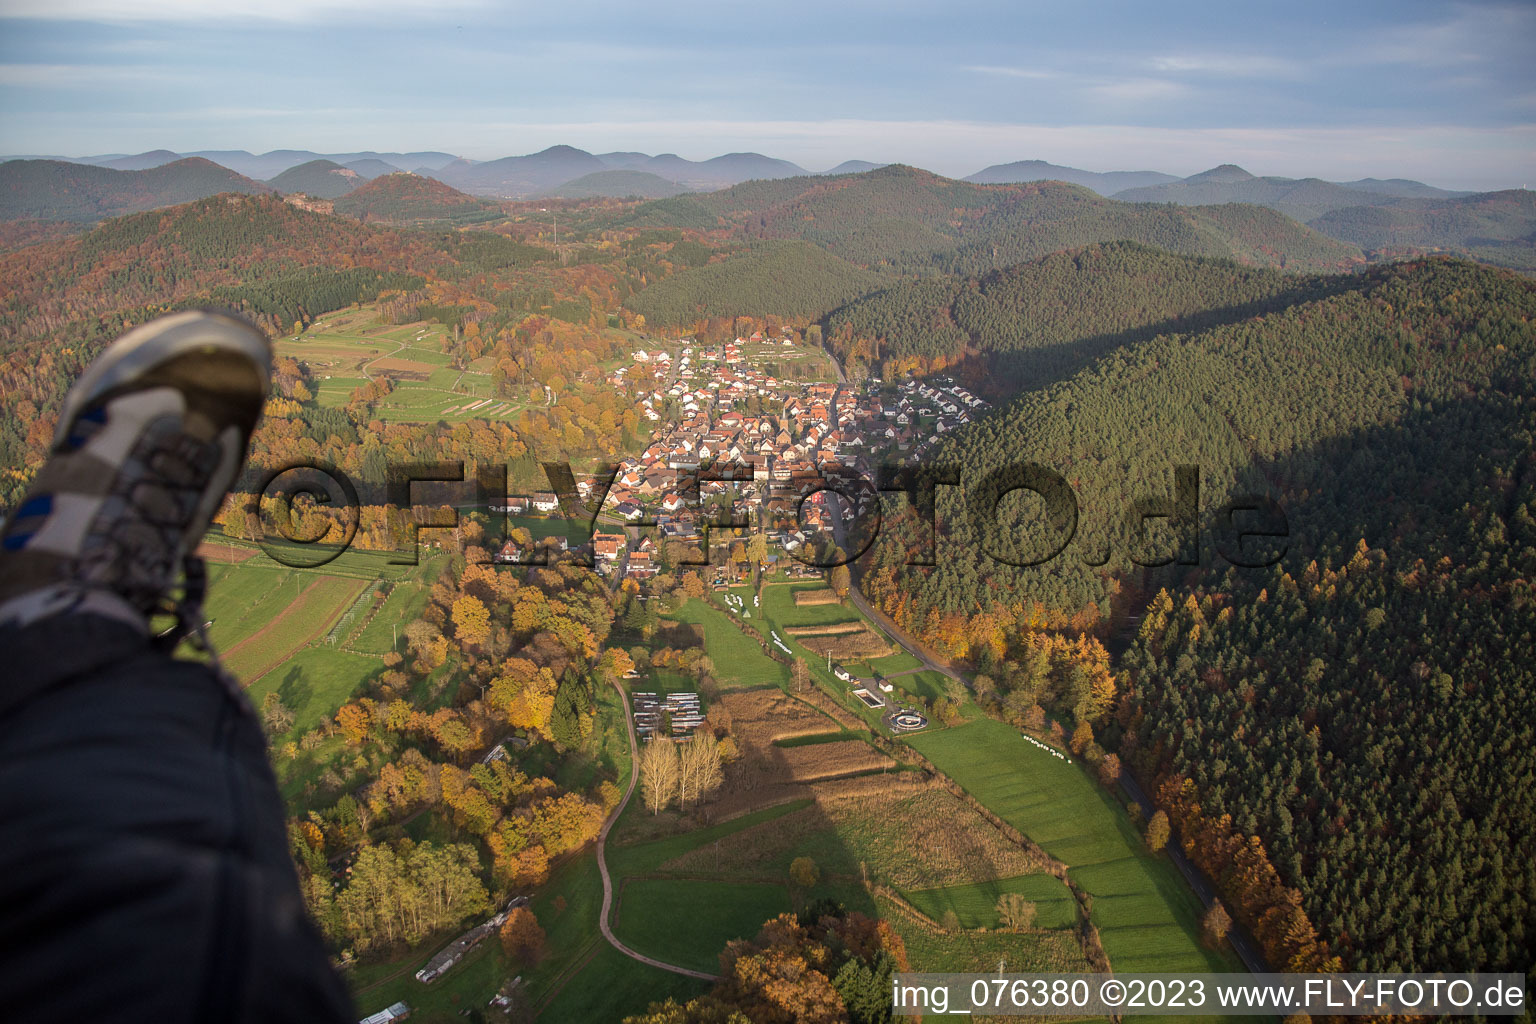 Aerial photograpy of Vorderweidenthal in the state Rhineland-Palatinate, Germany